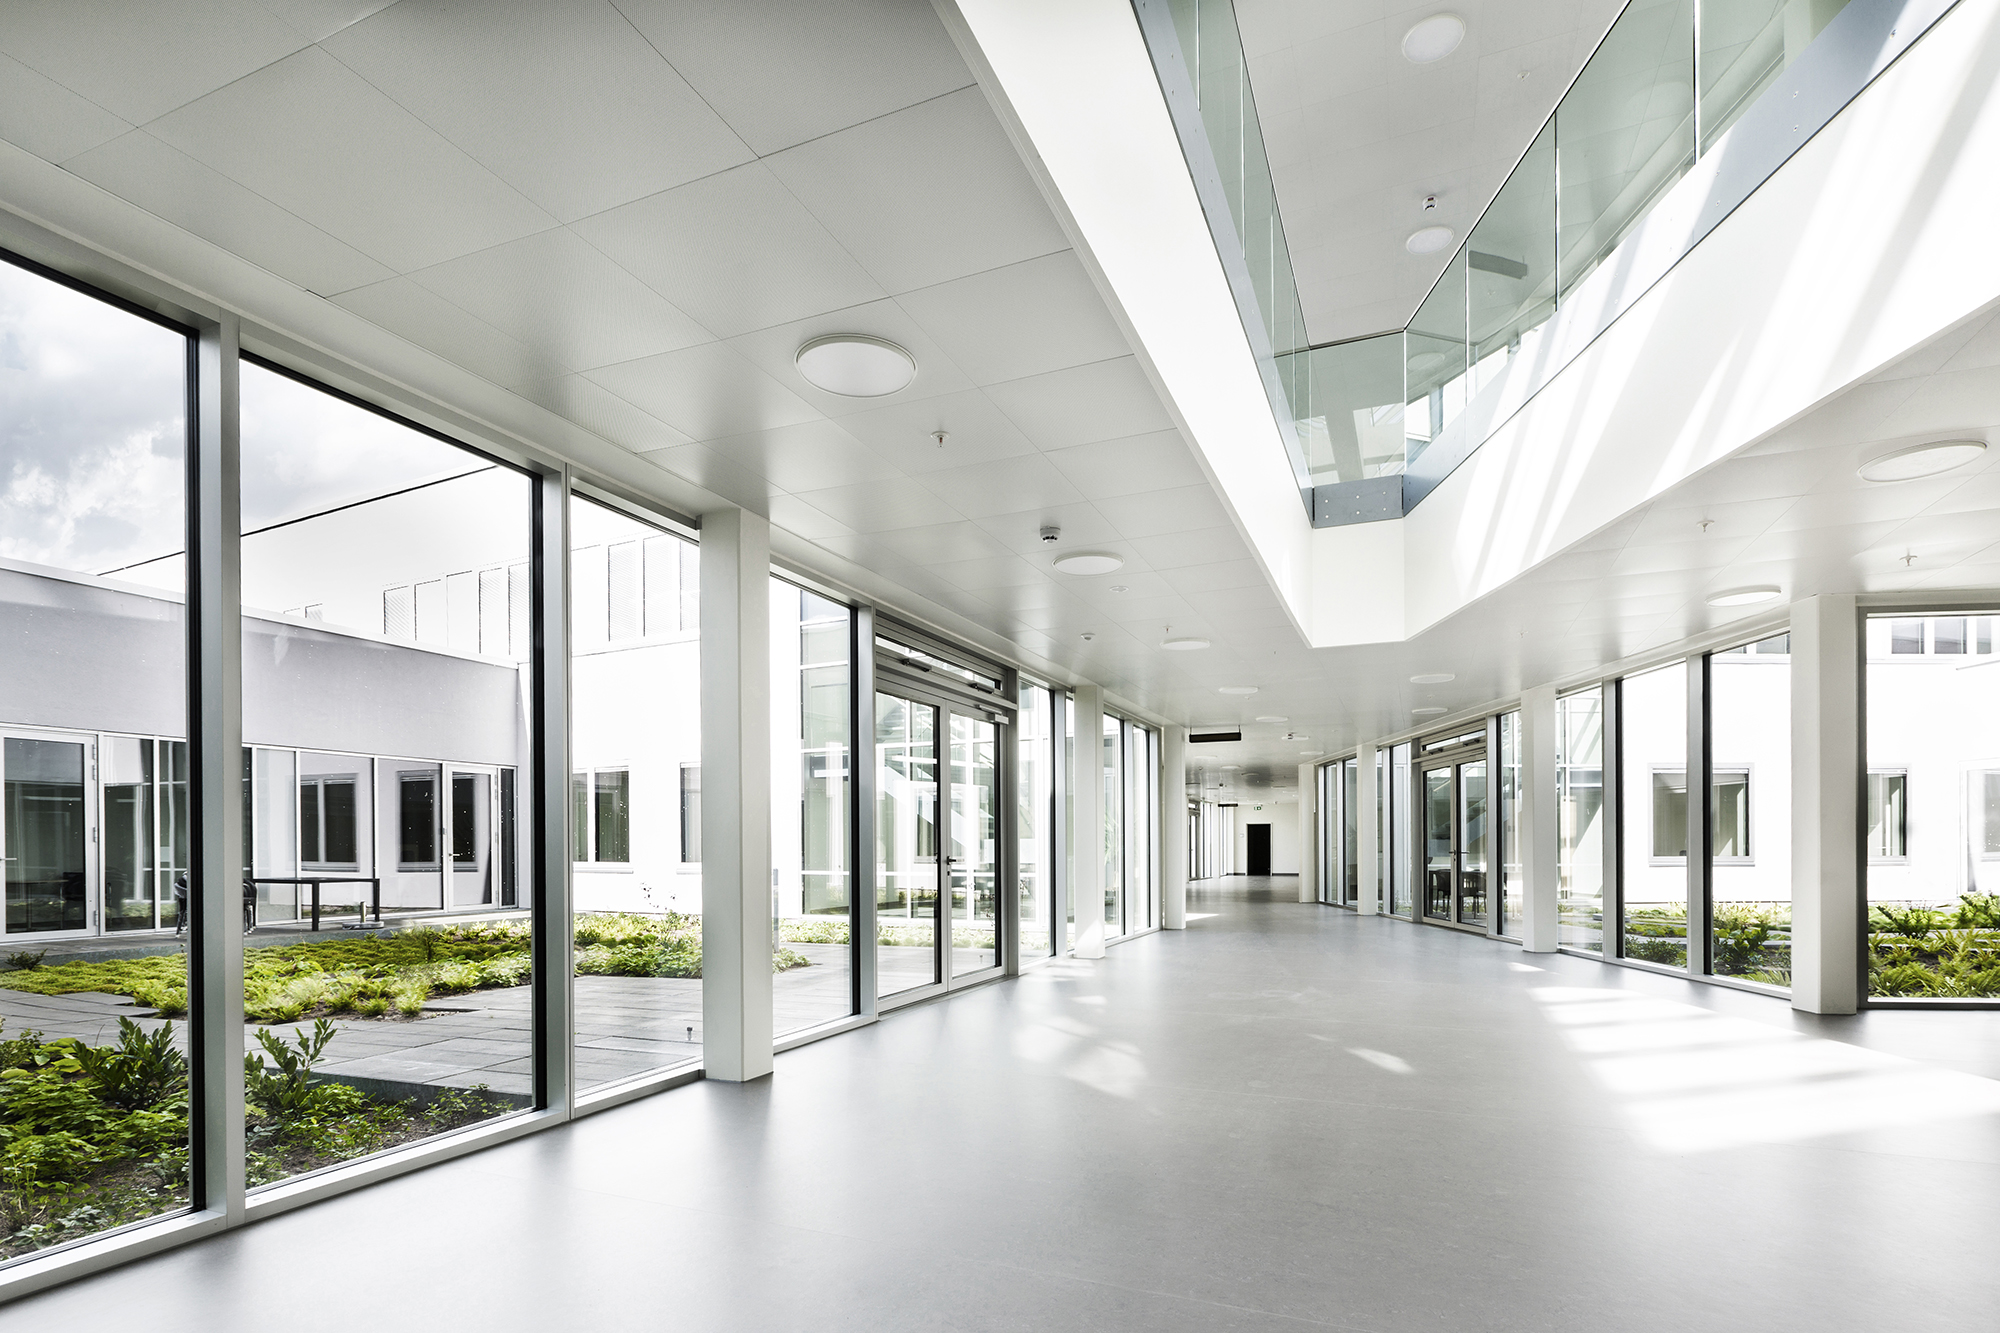 Photo of Aabenraa Psychiatric Hospital by White architects. Photo credit: Signe Find Larsen